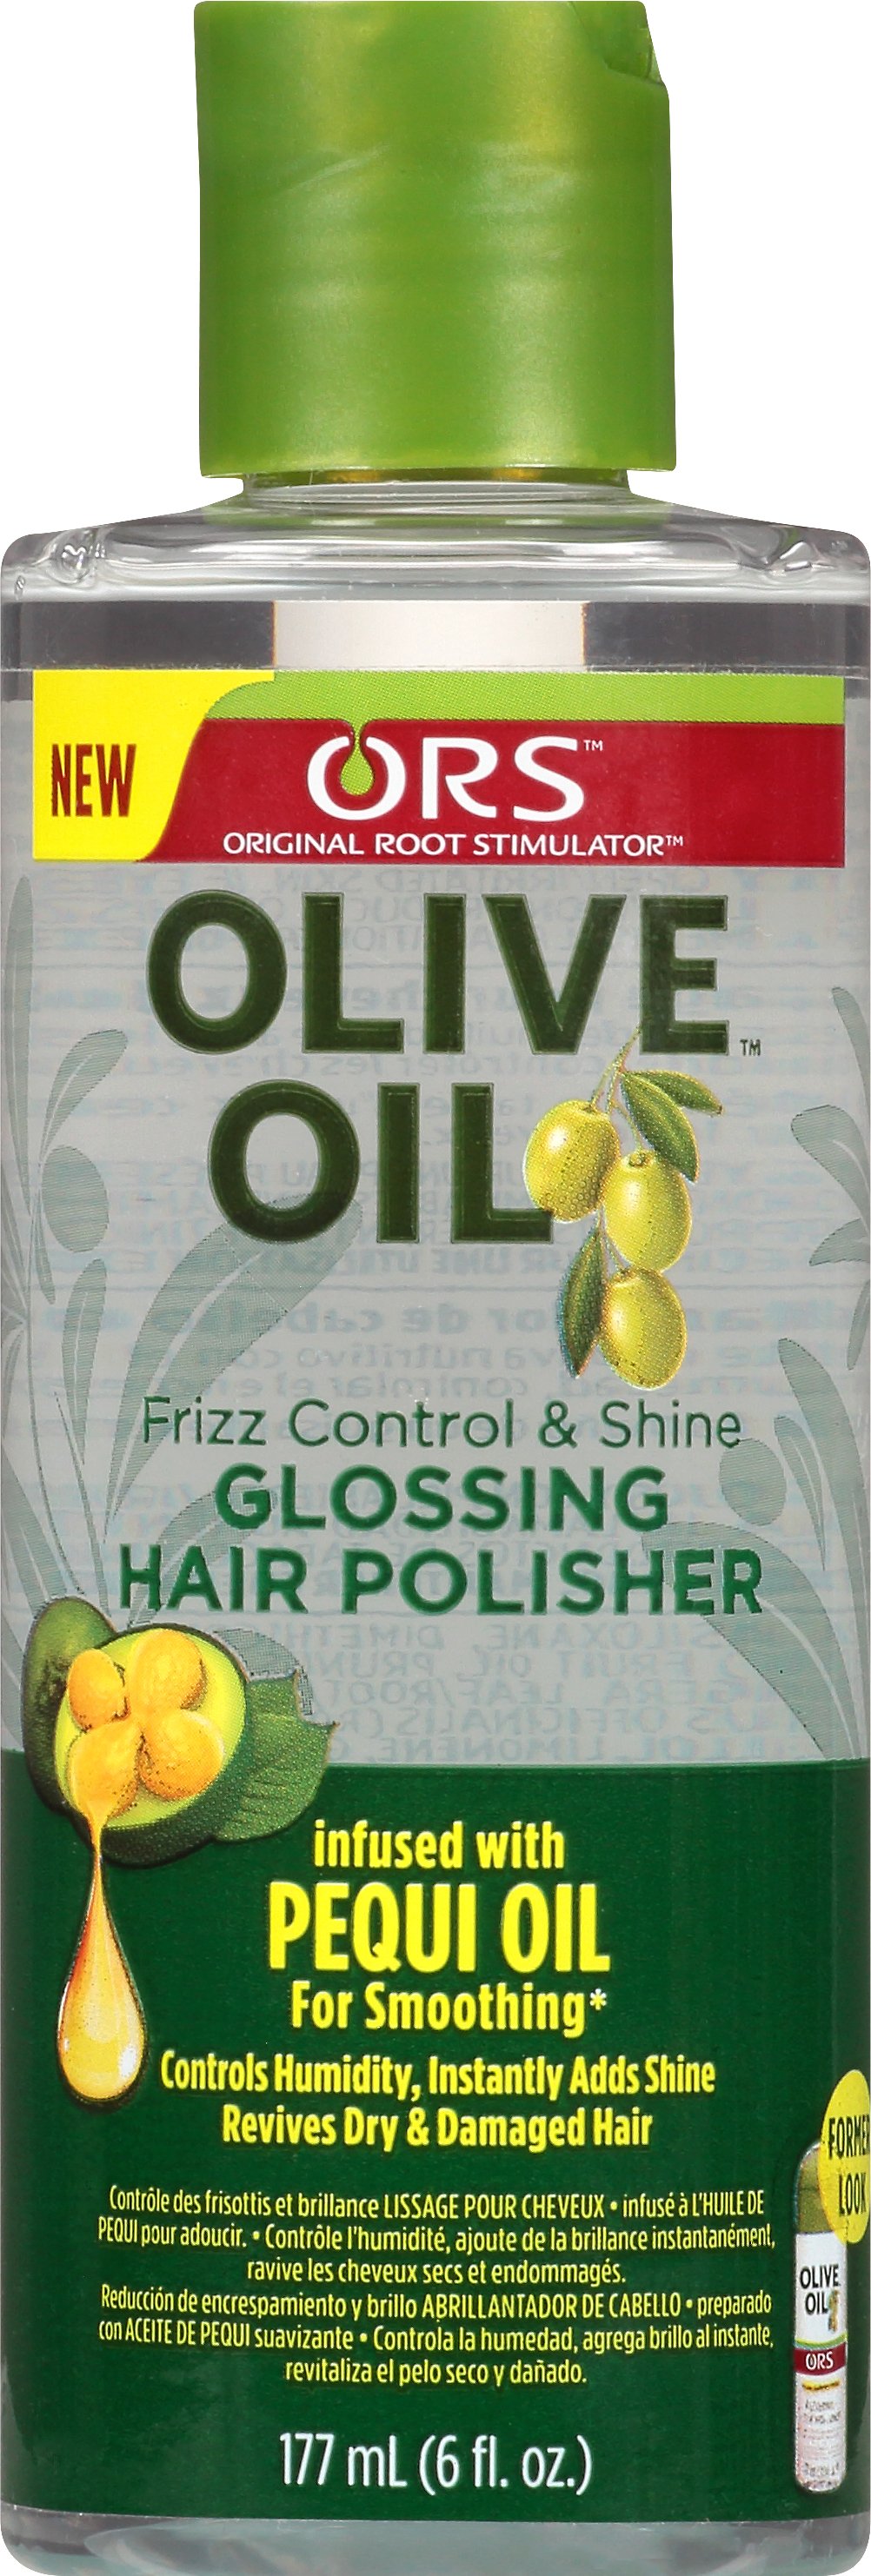 ORS Olive Oil Glossing Hair Polisher Oil with Pequi Oil for Smoothing, Frizz Control & Shine, 6 fl oz - image 2 of 4